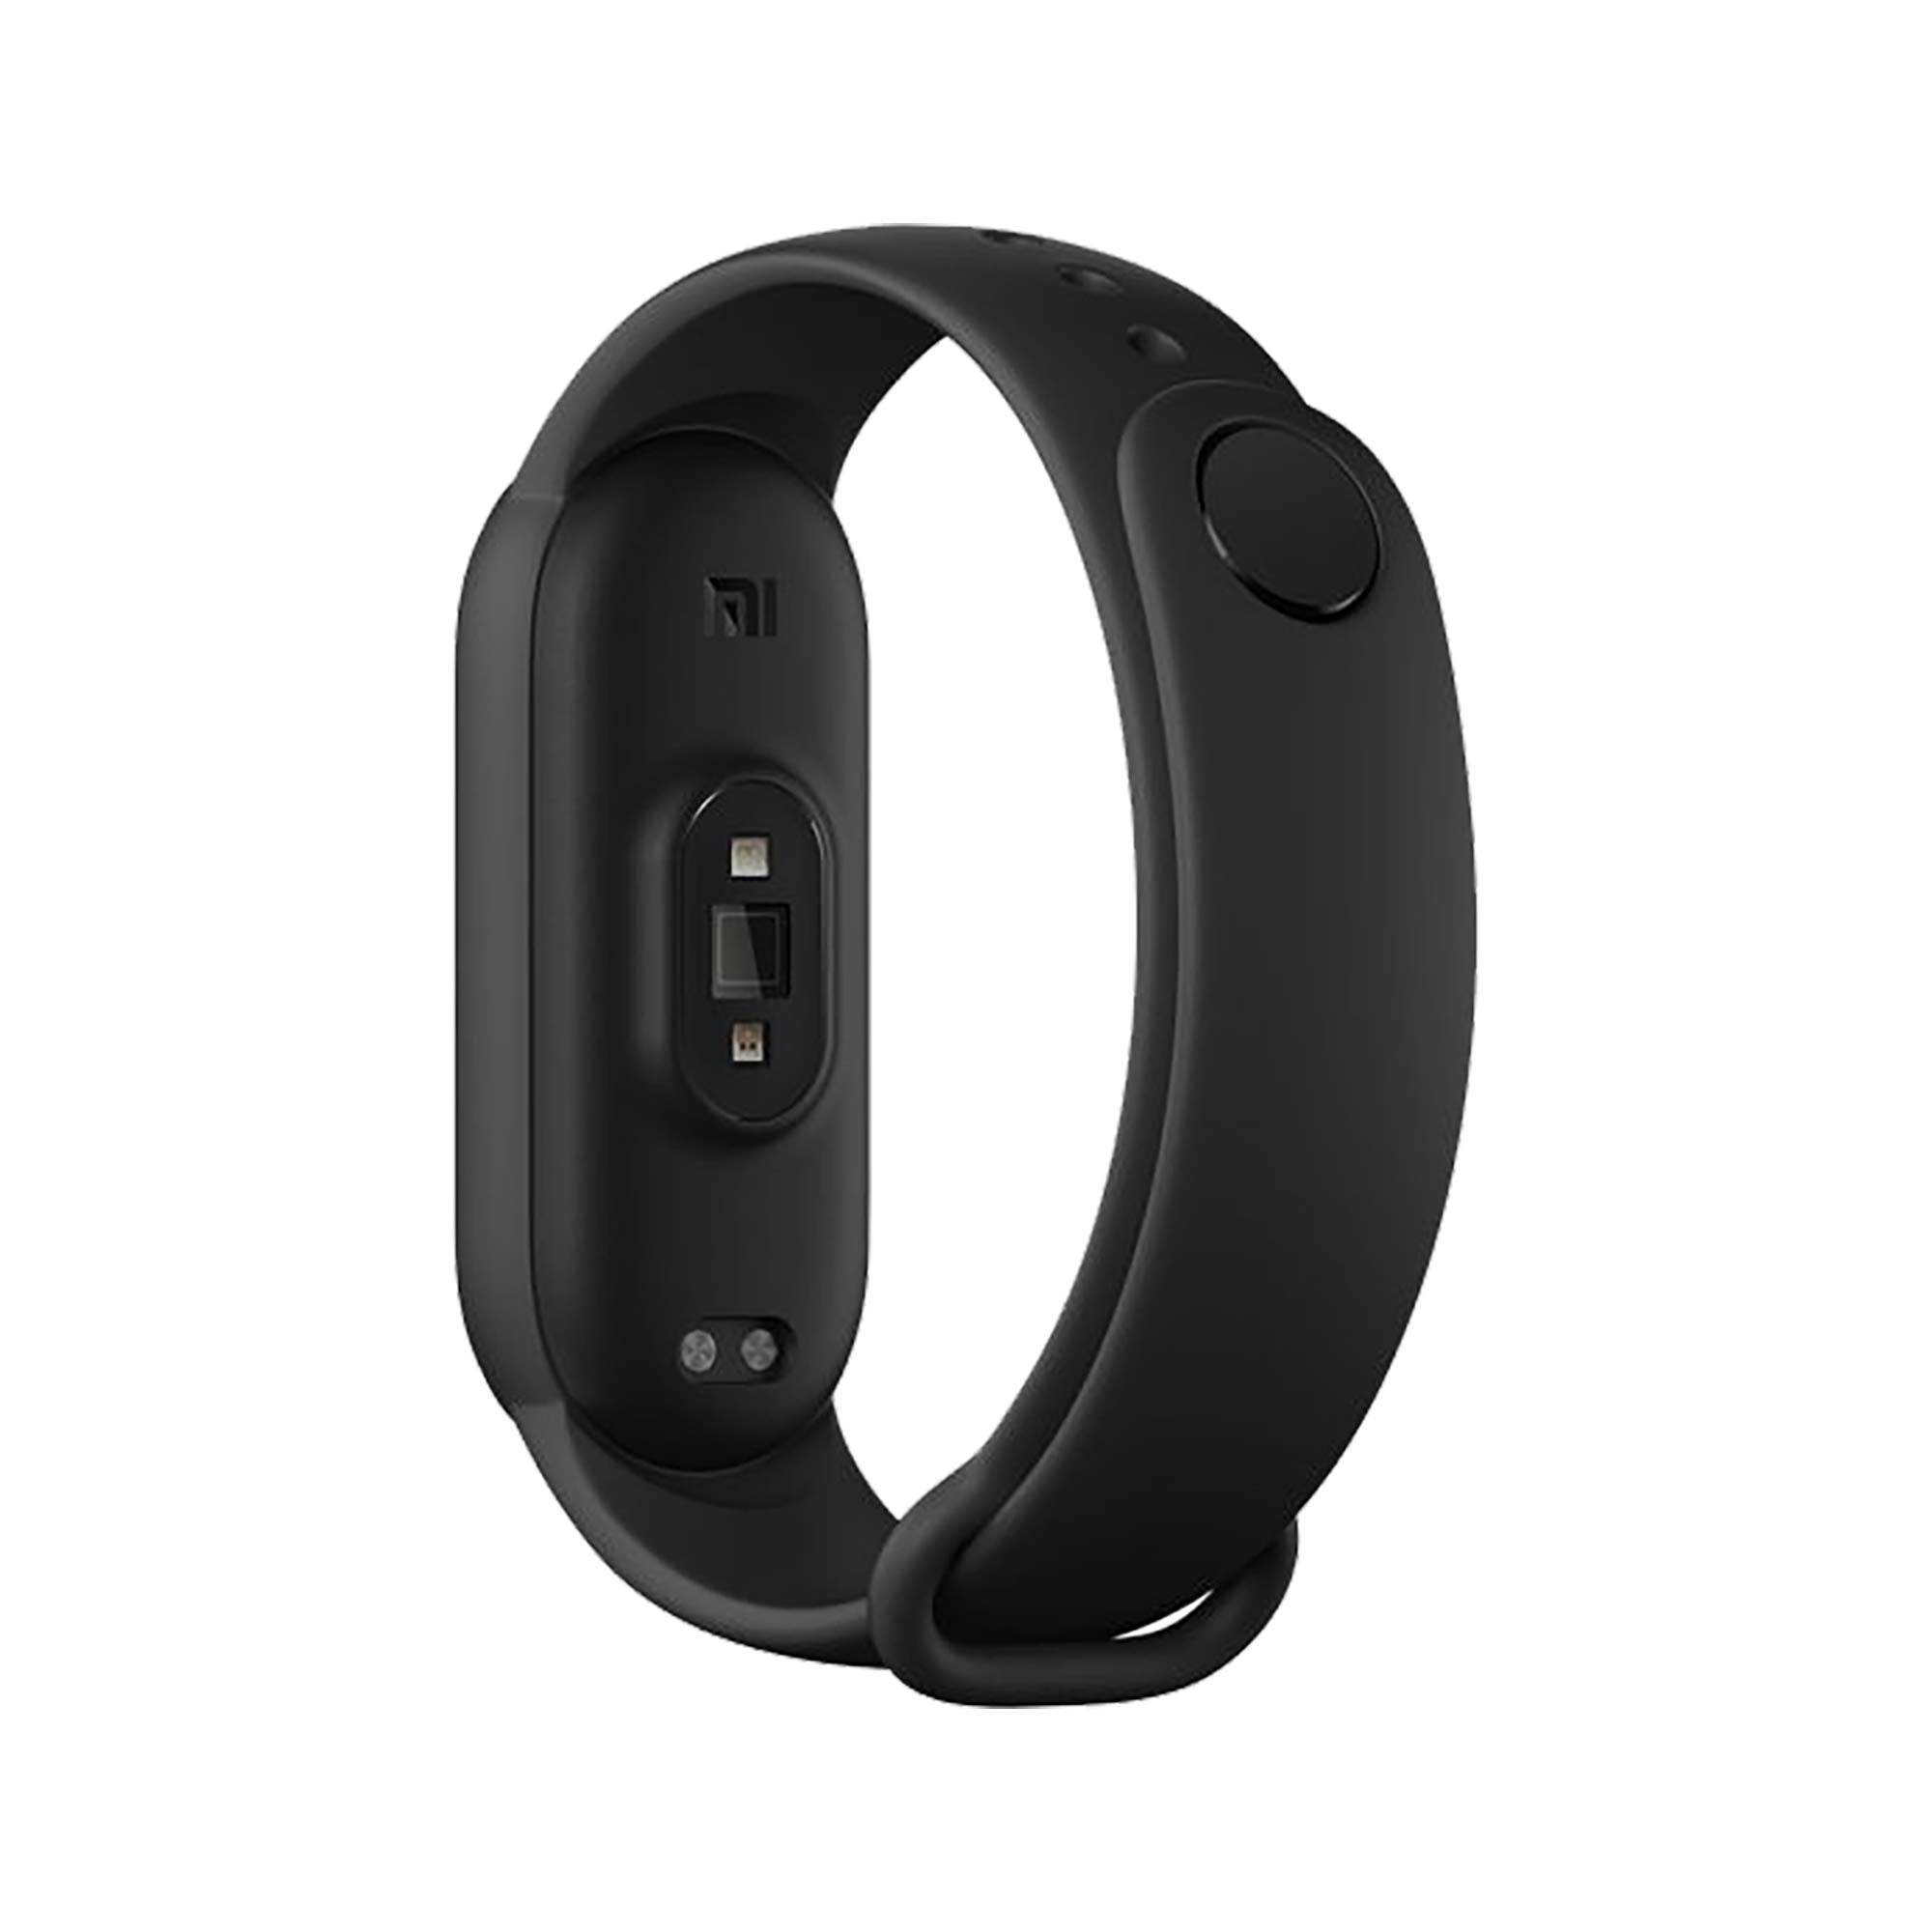 Xiaomi Mi Band 5 Black Health and Fitness Tracker, Upto 14 Days Battery, Heart Rate Monitor, Sleep Tracker, Activity Tracker, 5ATM 50 m Water Resistance and Swimming Tracking, Pedometer, Sleep Counter